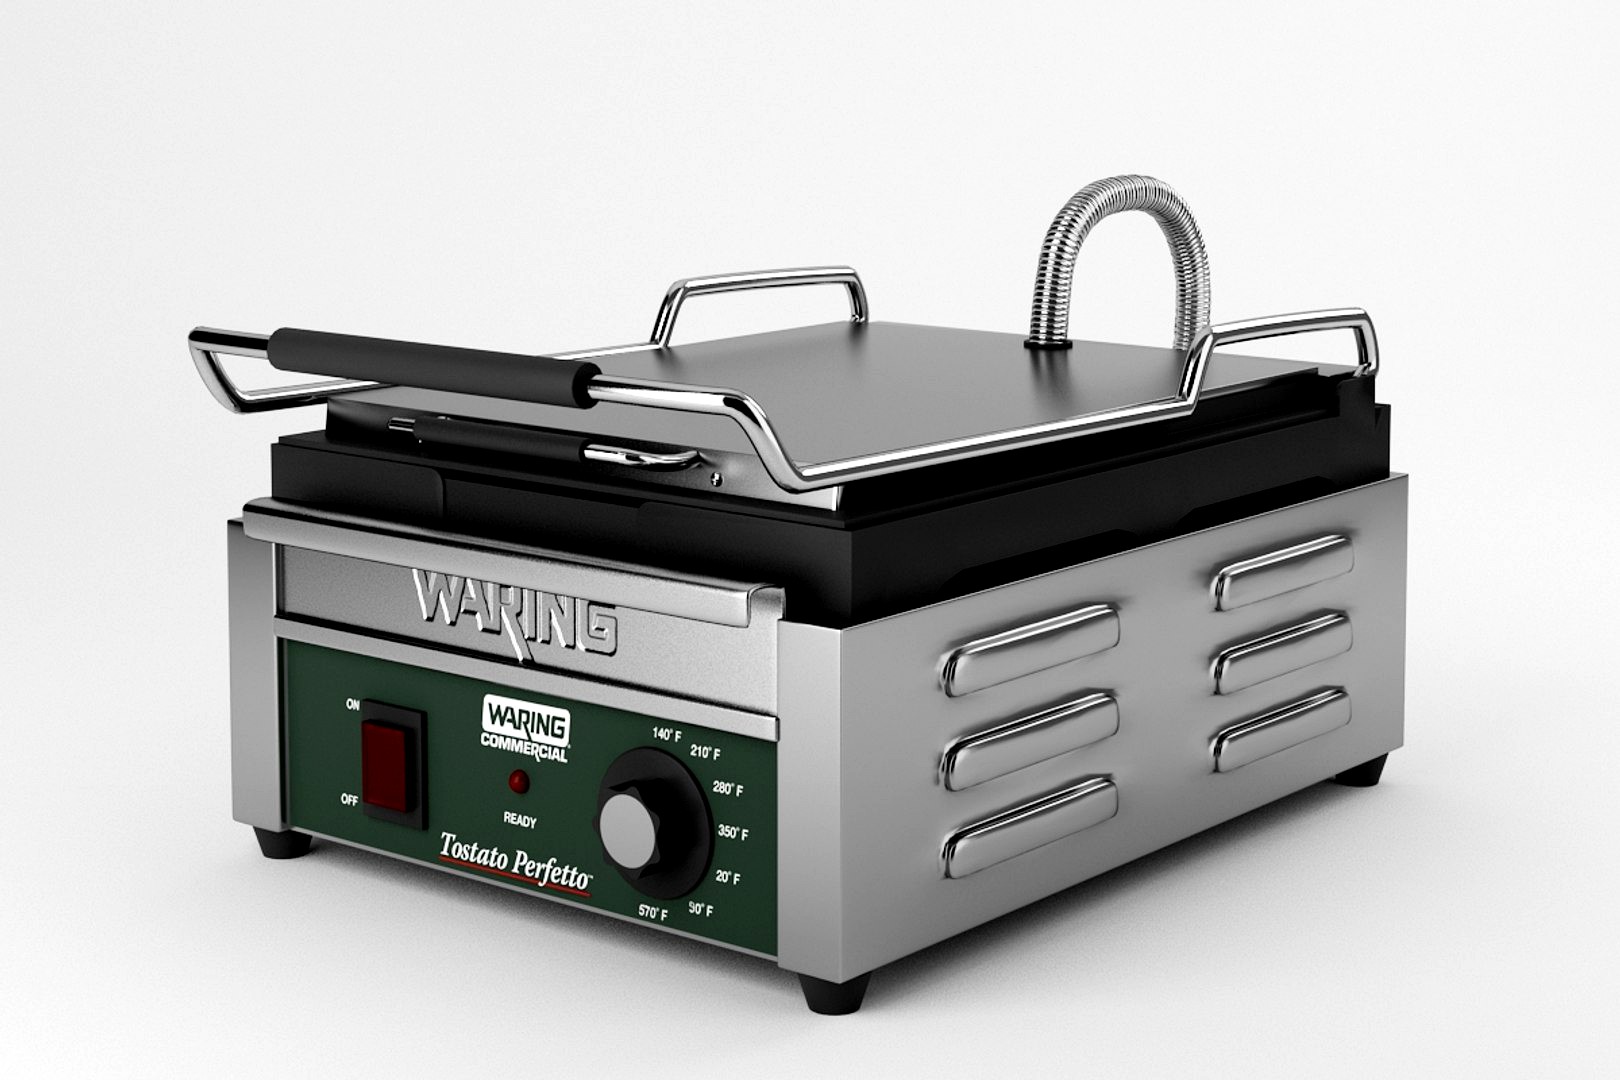 Waring toasting grill